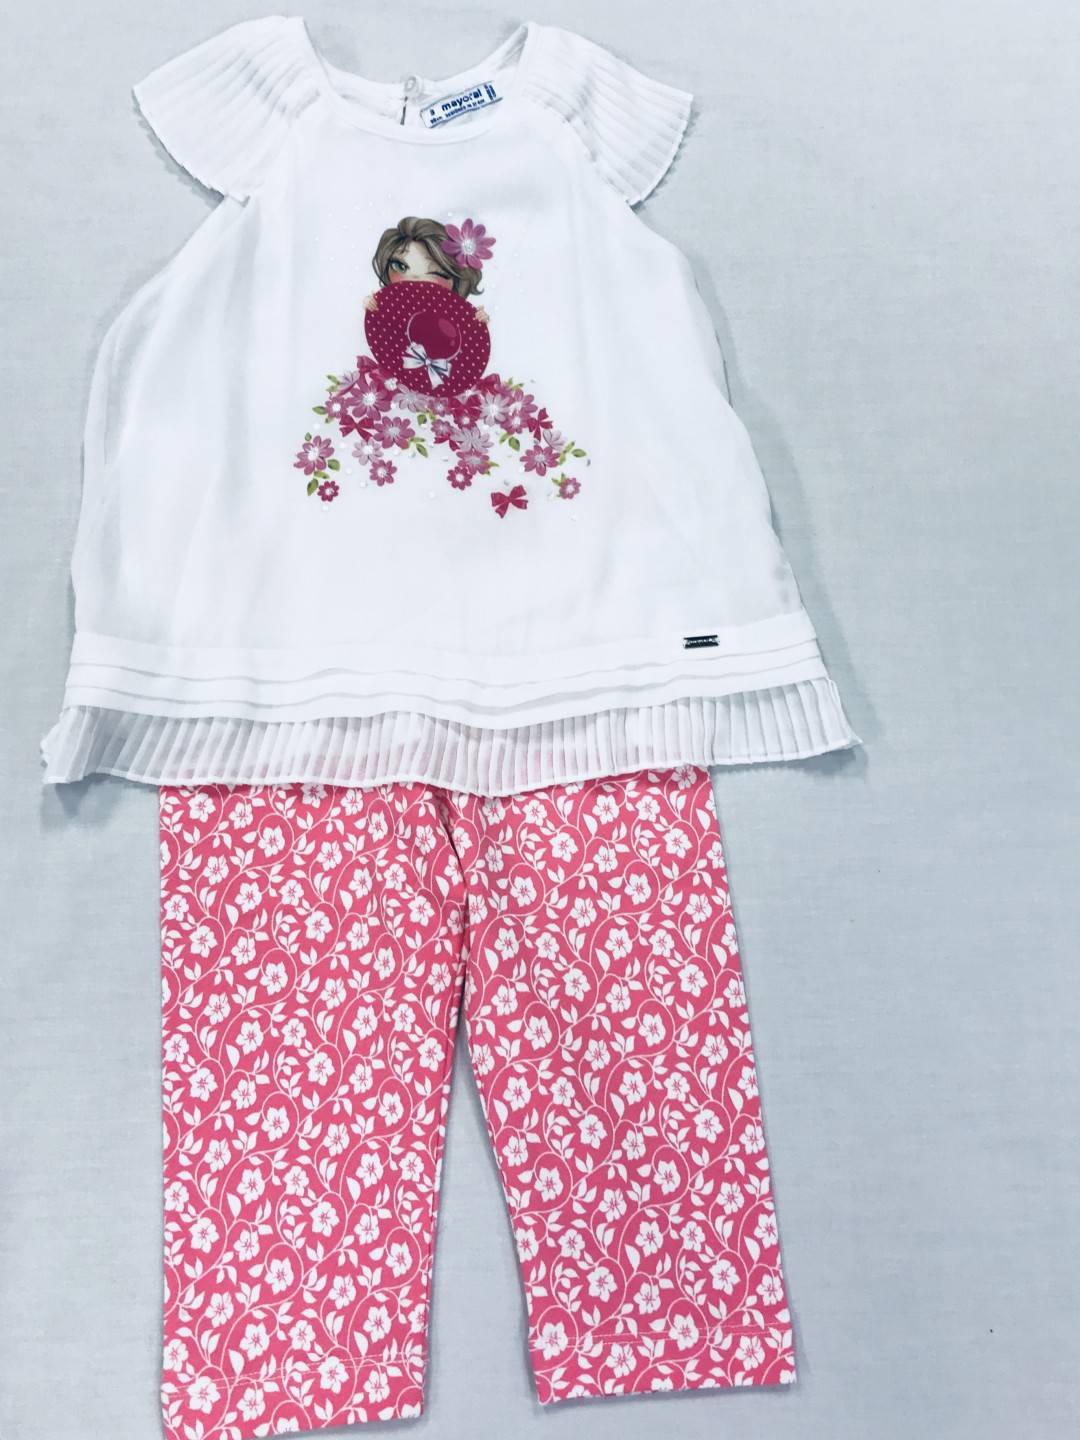 PINK AND WHITE FLORAL 2-PIECE SET SIZES 2-8